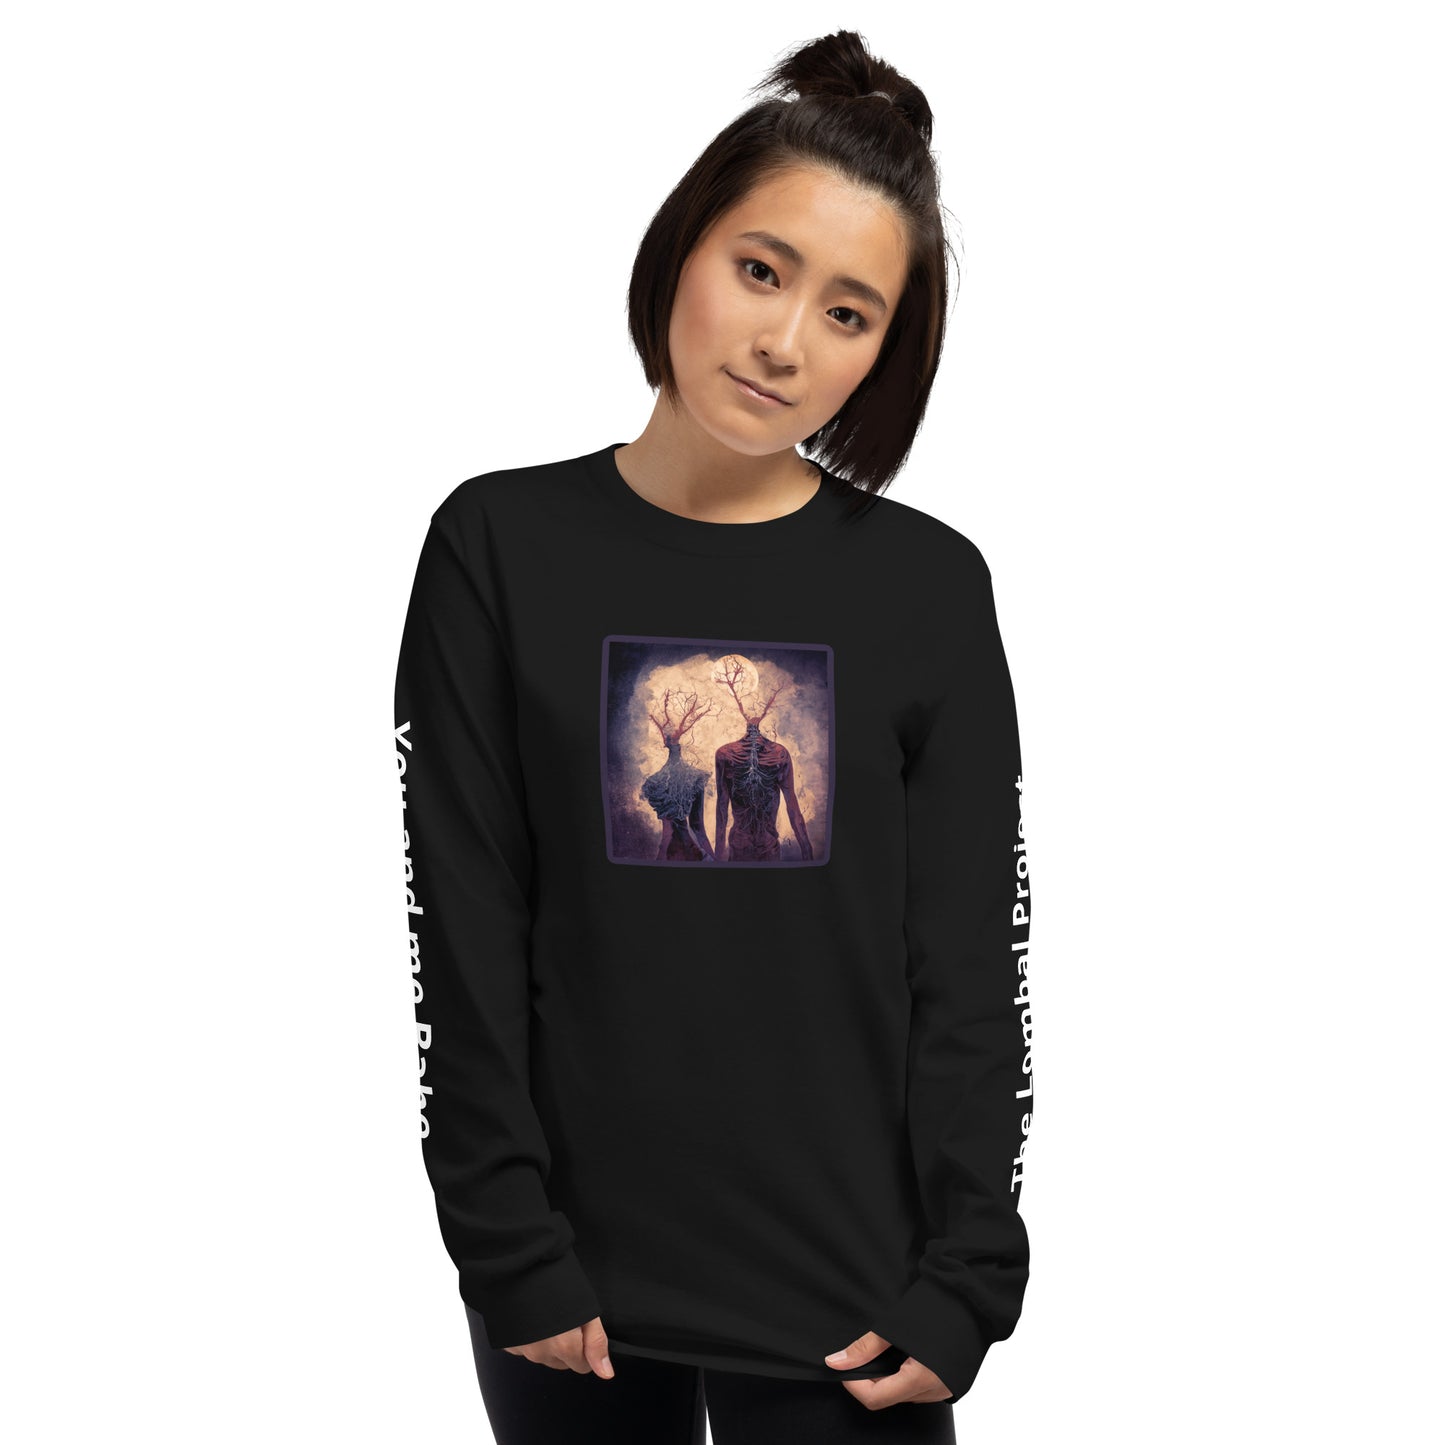 7/12 You and me Babe Long Sleeve Shirt